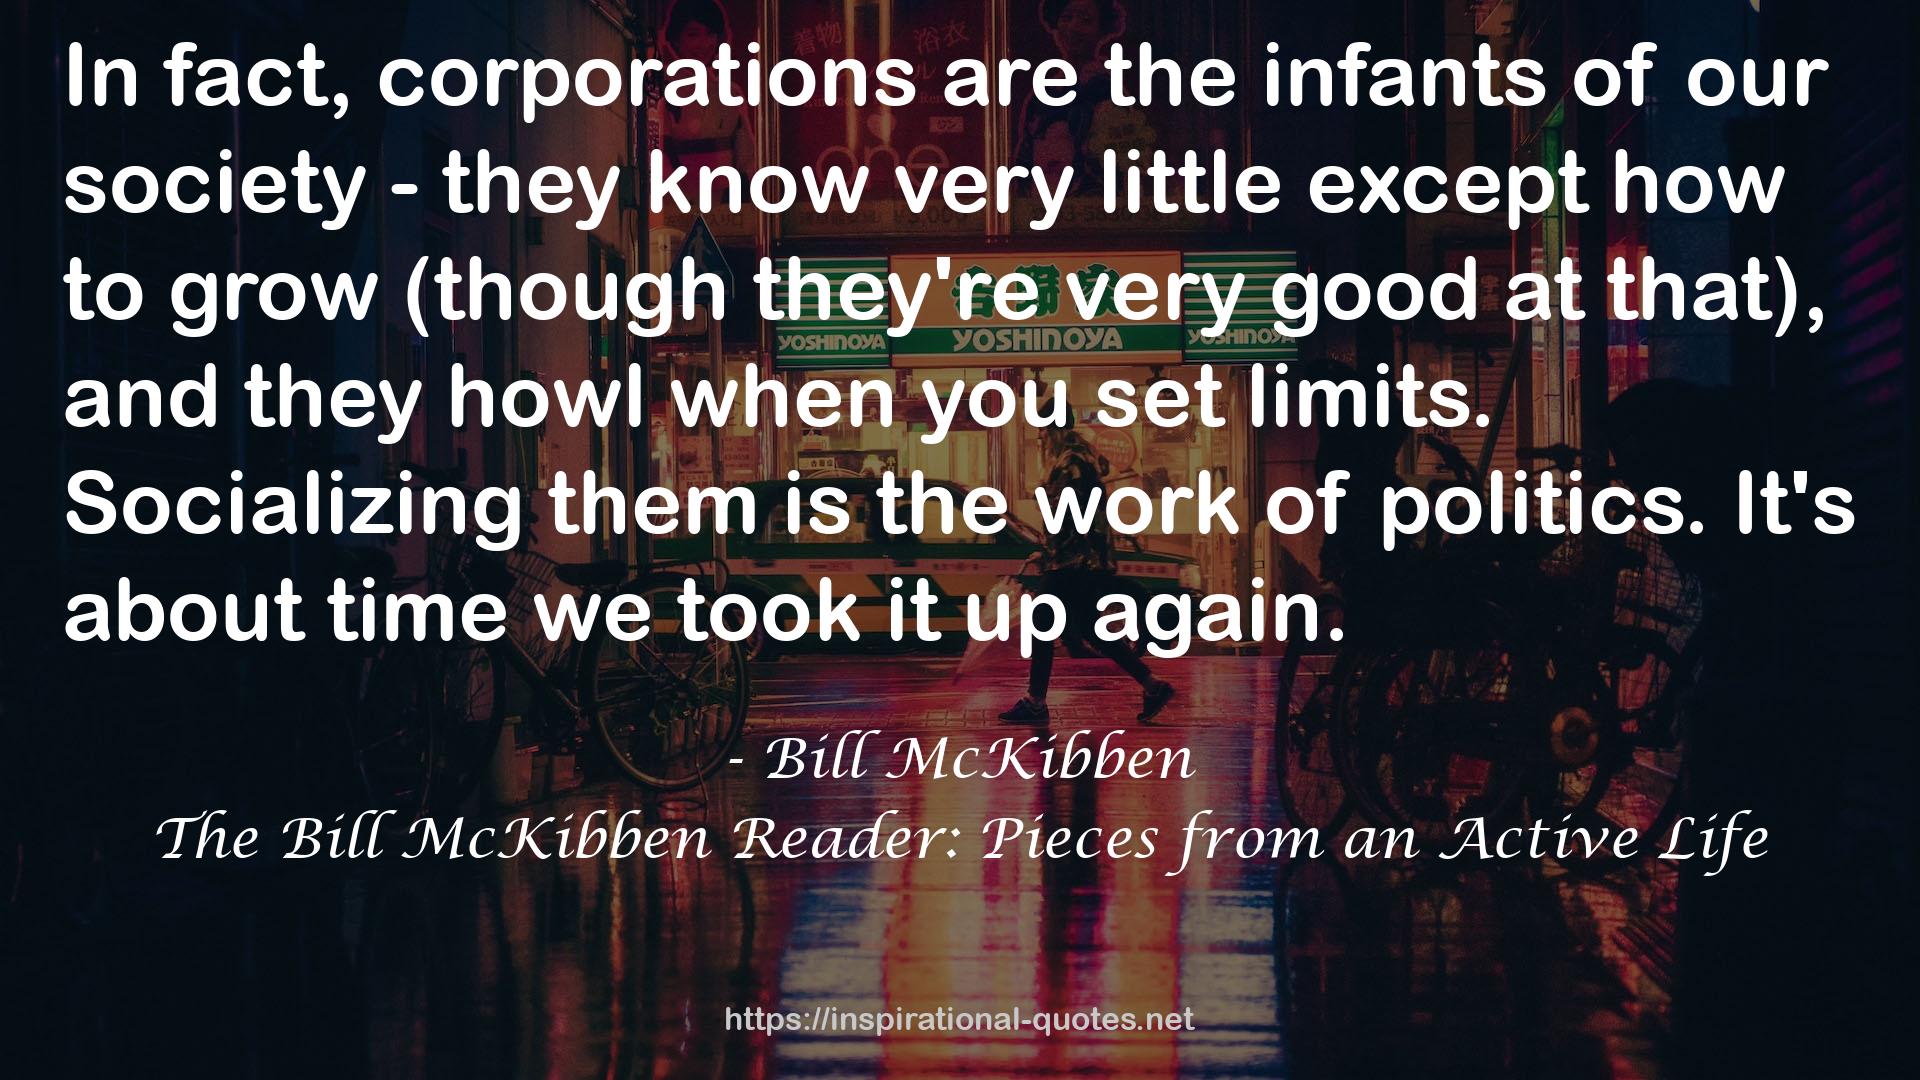 The Bill McKibben Reader: Pieces from an Active Life QUOTES